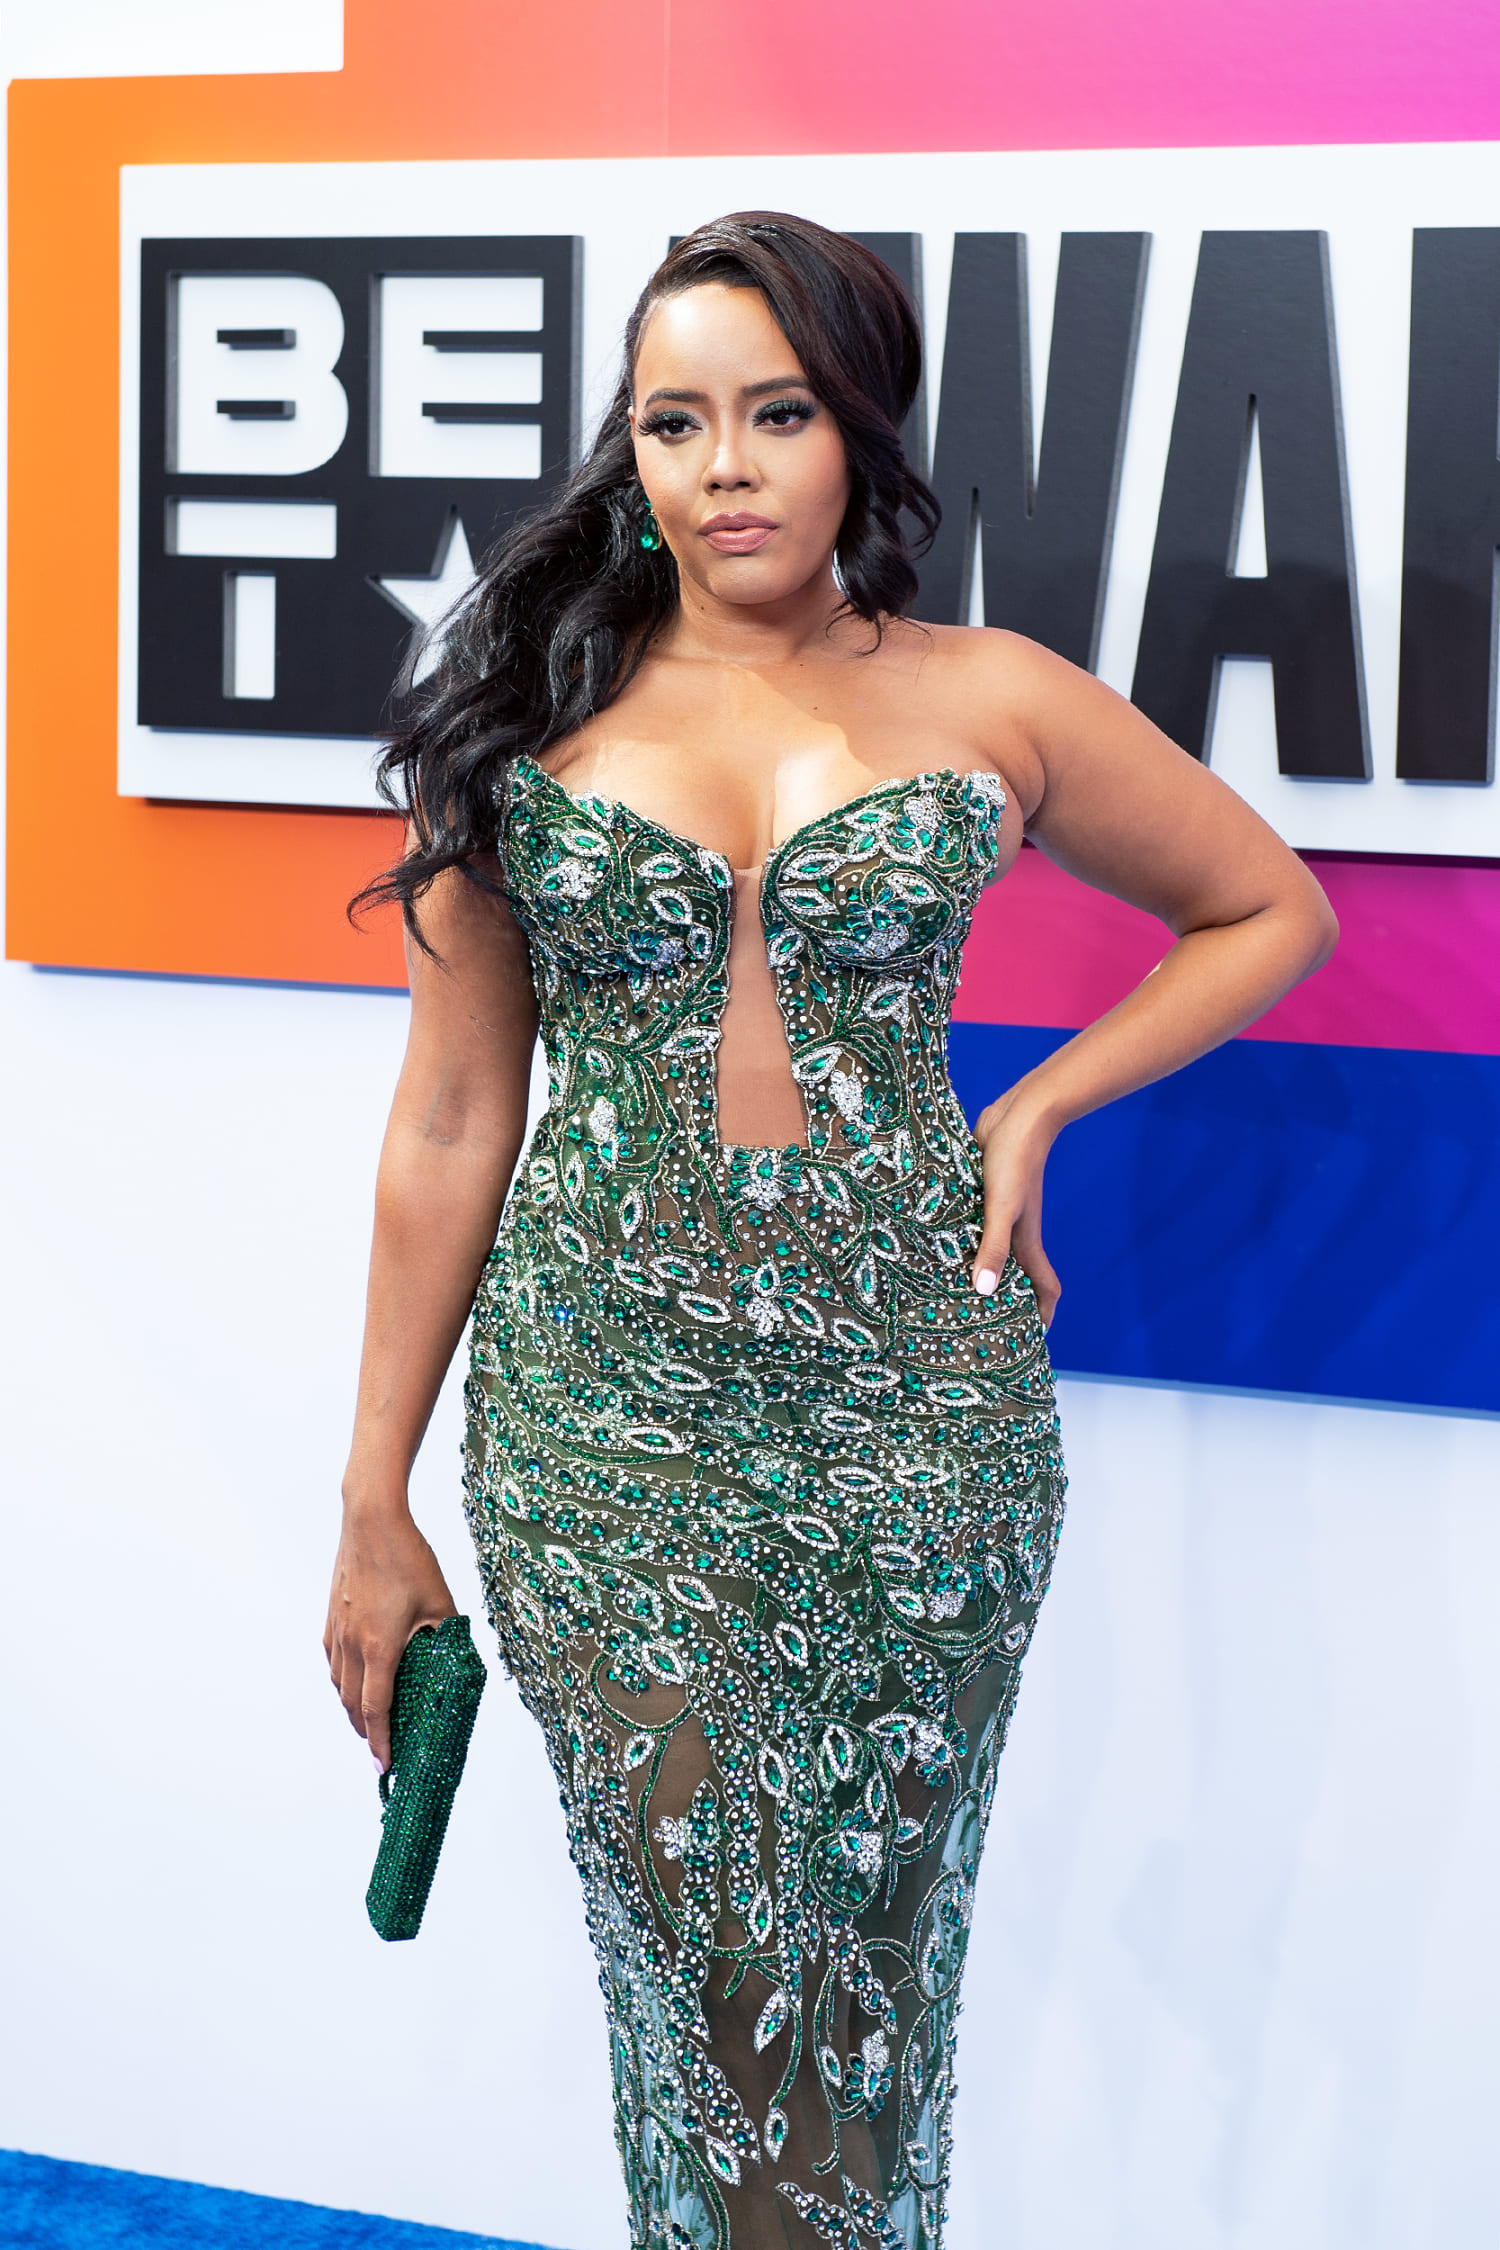 Angela Simmons apologizes for bringing gun-shaped purse to BET Awards